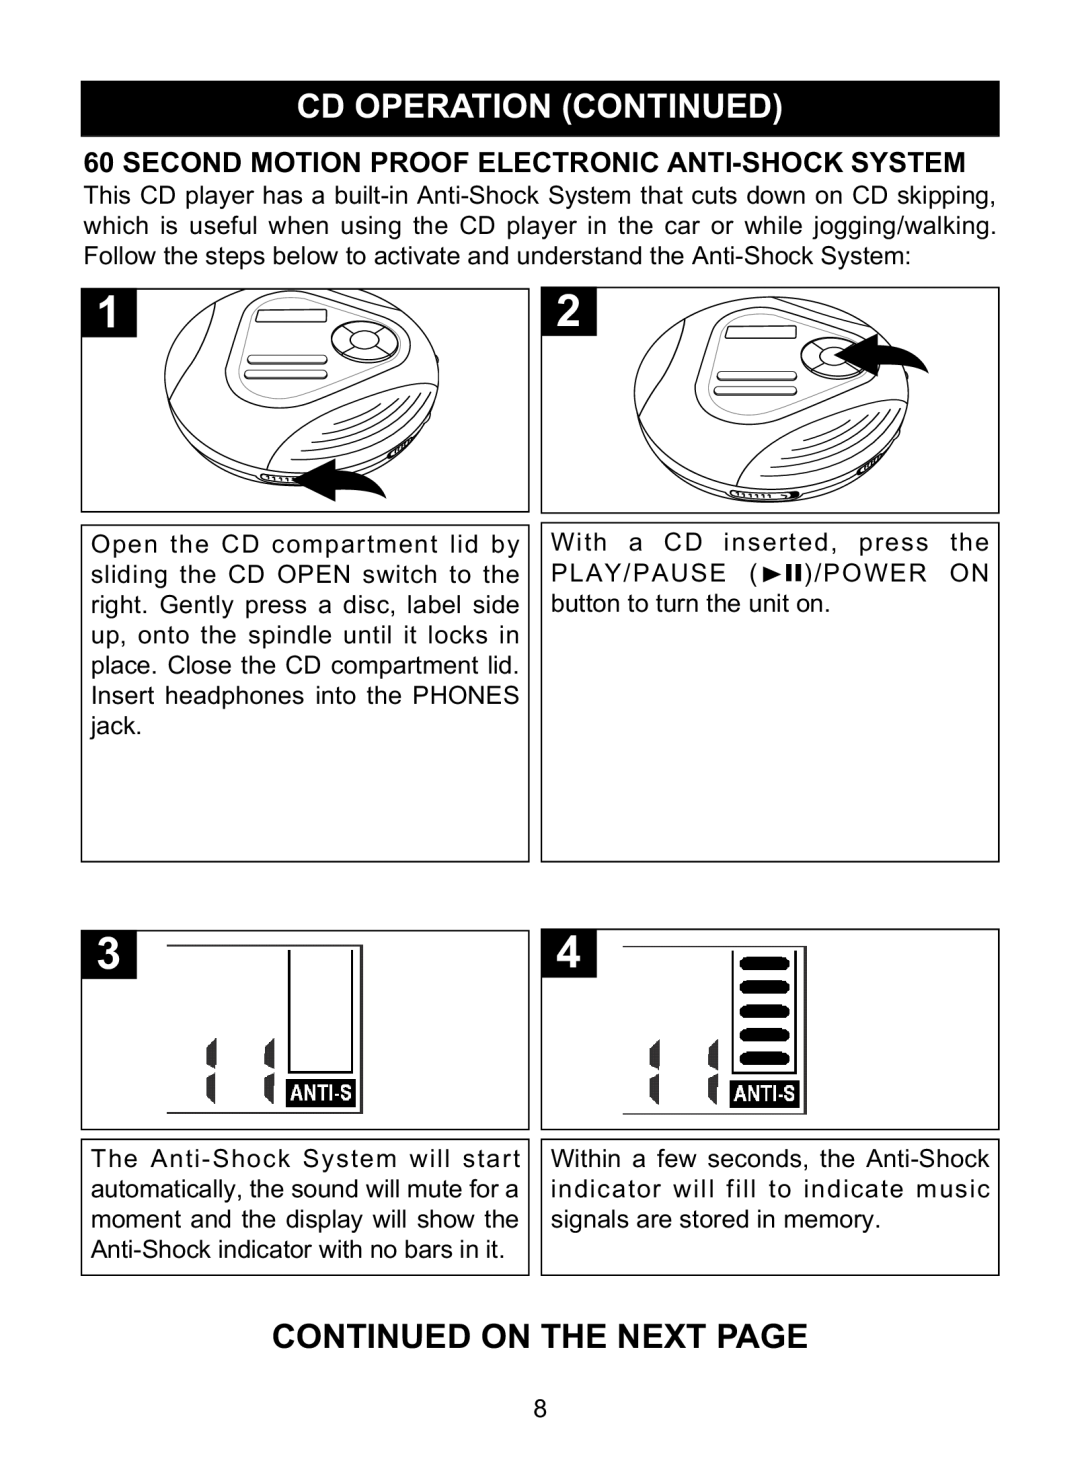 Memorex MD6460 manual Cd Operation Continued, Continued On The Next Page 